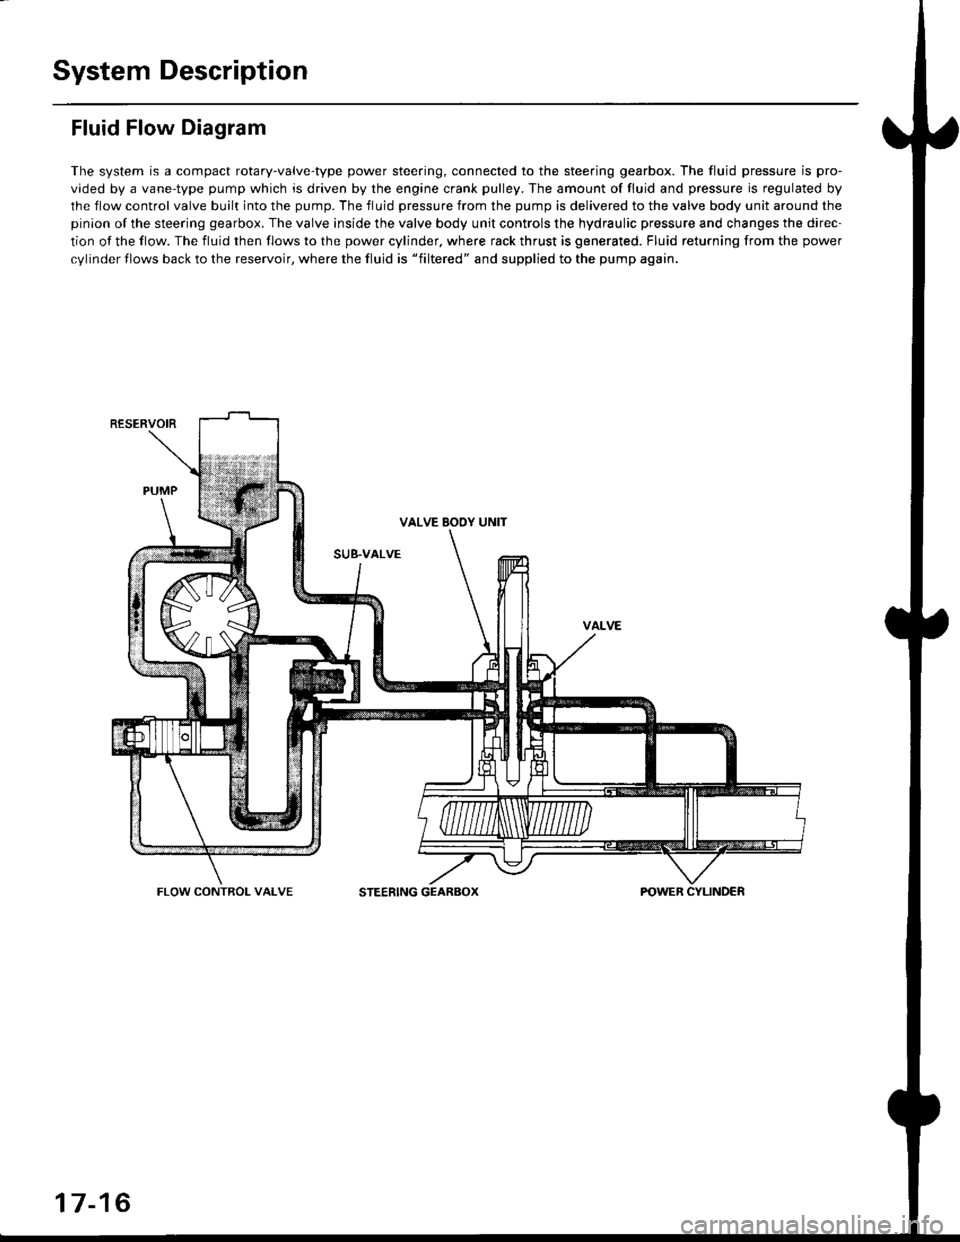 HONDA CIVIC 1996 6.G Workshop Manual System Description
Fluid Flow Diagram
The system is a compact rotary-valve-type power steering, connected to the steering gearbox. The fluid pressure is pro-
vided by a vane-type pump which is driven 